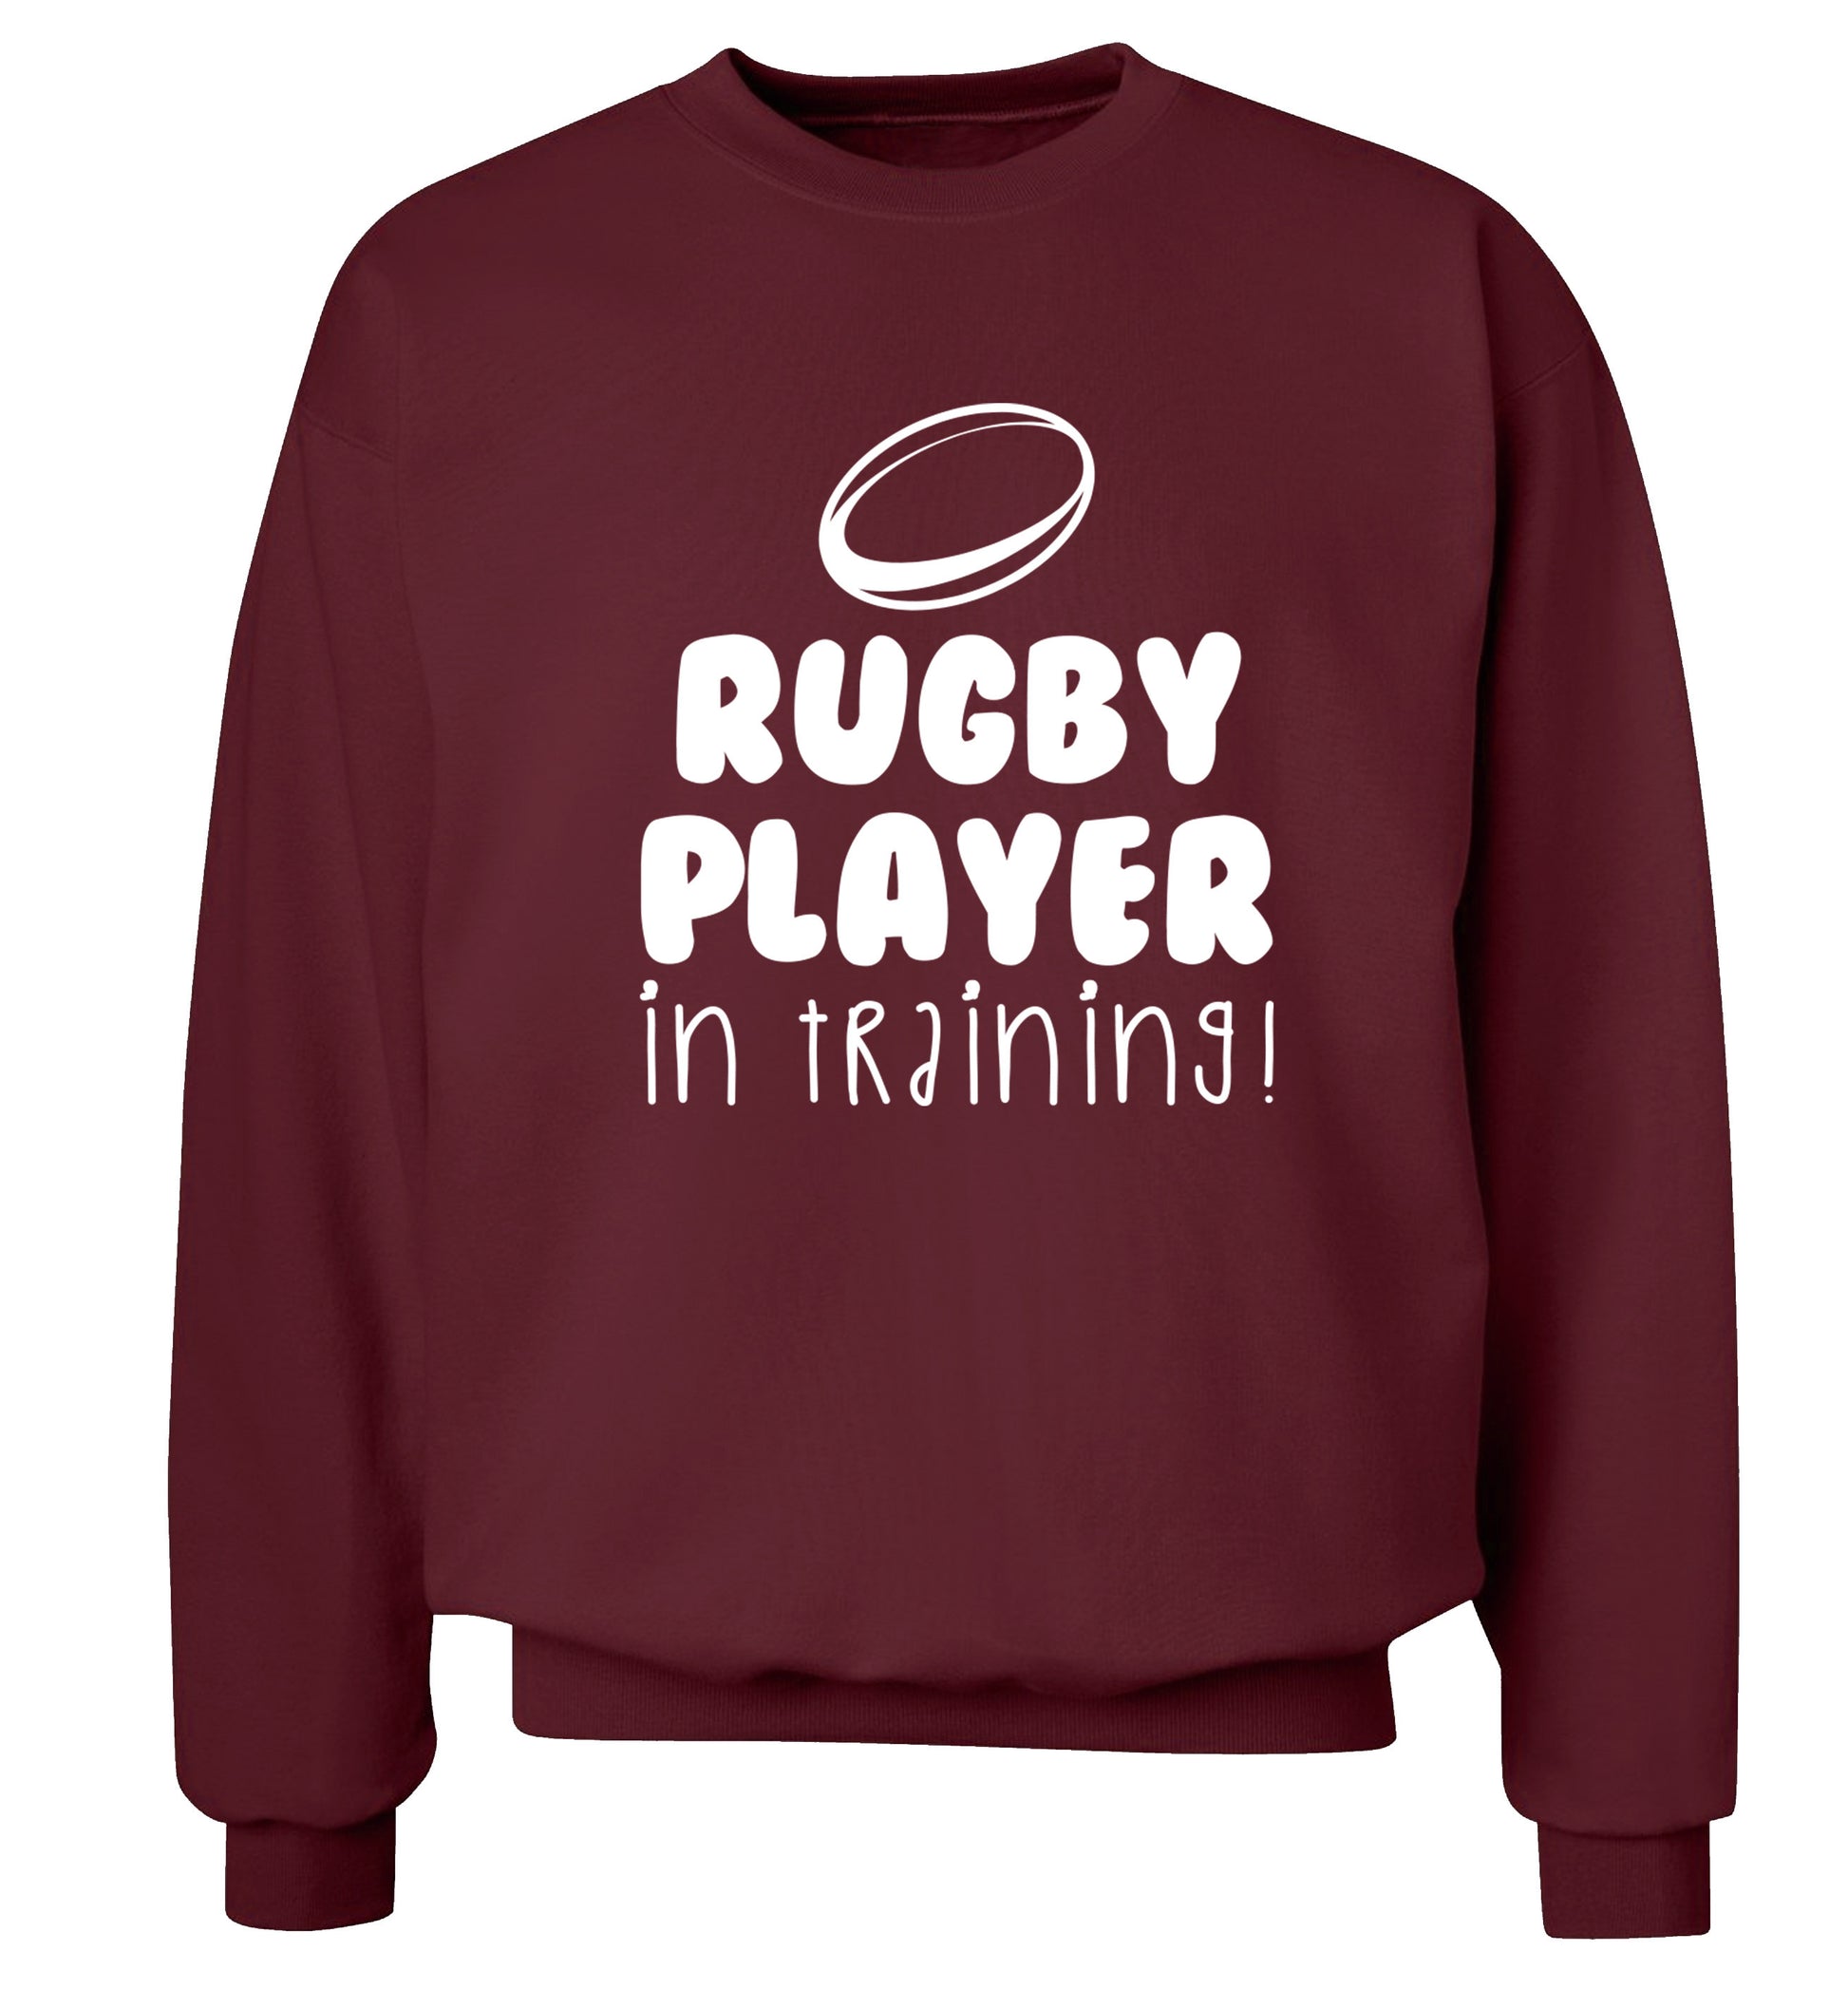 Rugby player in training Adult's unisex maroon Sweater 2XL